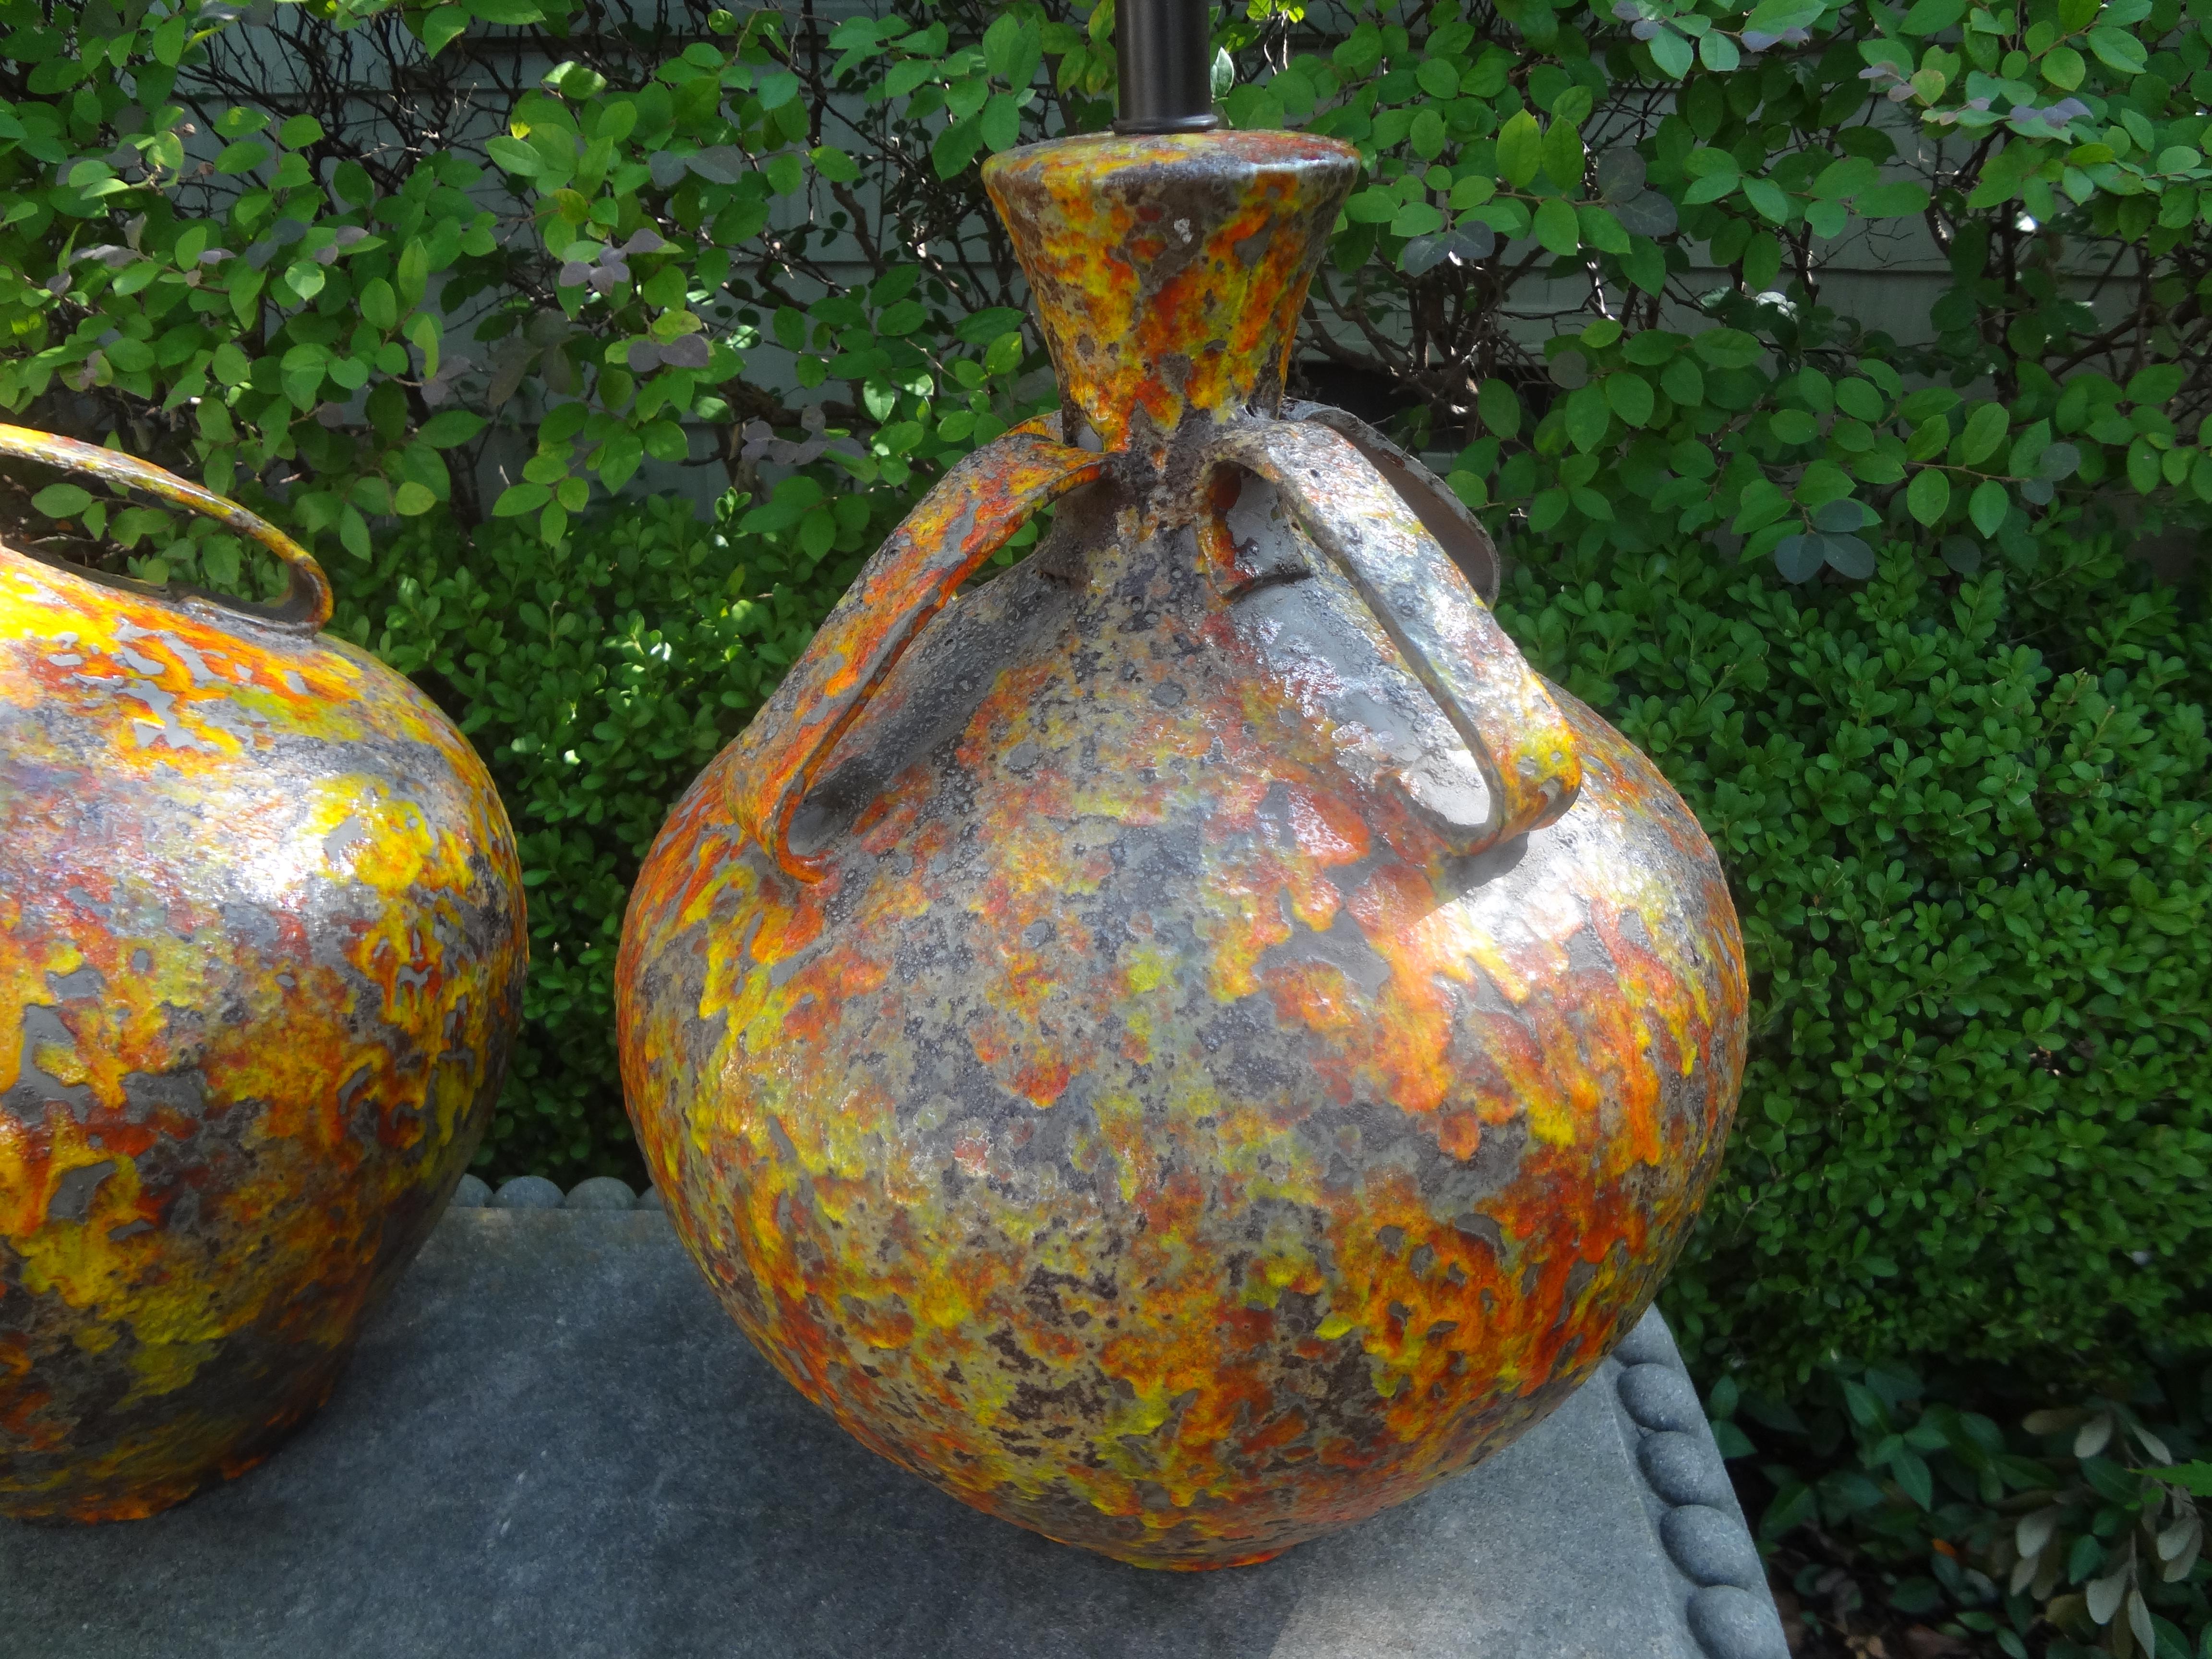 Pair of Hollywood regency glazed ceramic lamps. This stunning pair of midcentury lamps were executed in beautiful tones of oranges, yellows and browns with four handles on each. These chic lamps have been newly wired with new sockets for the